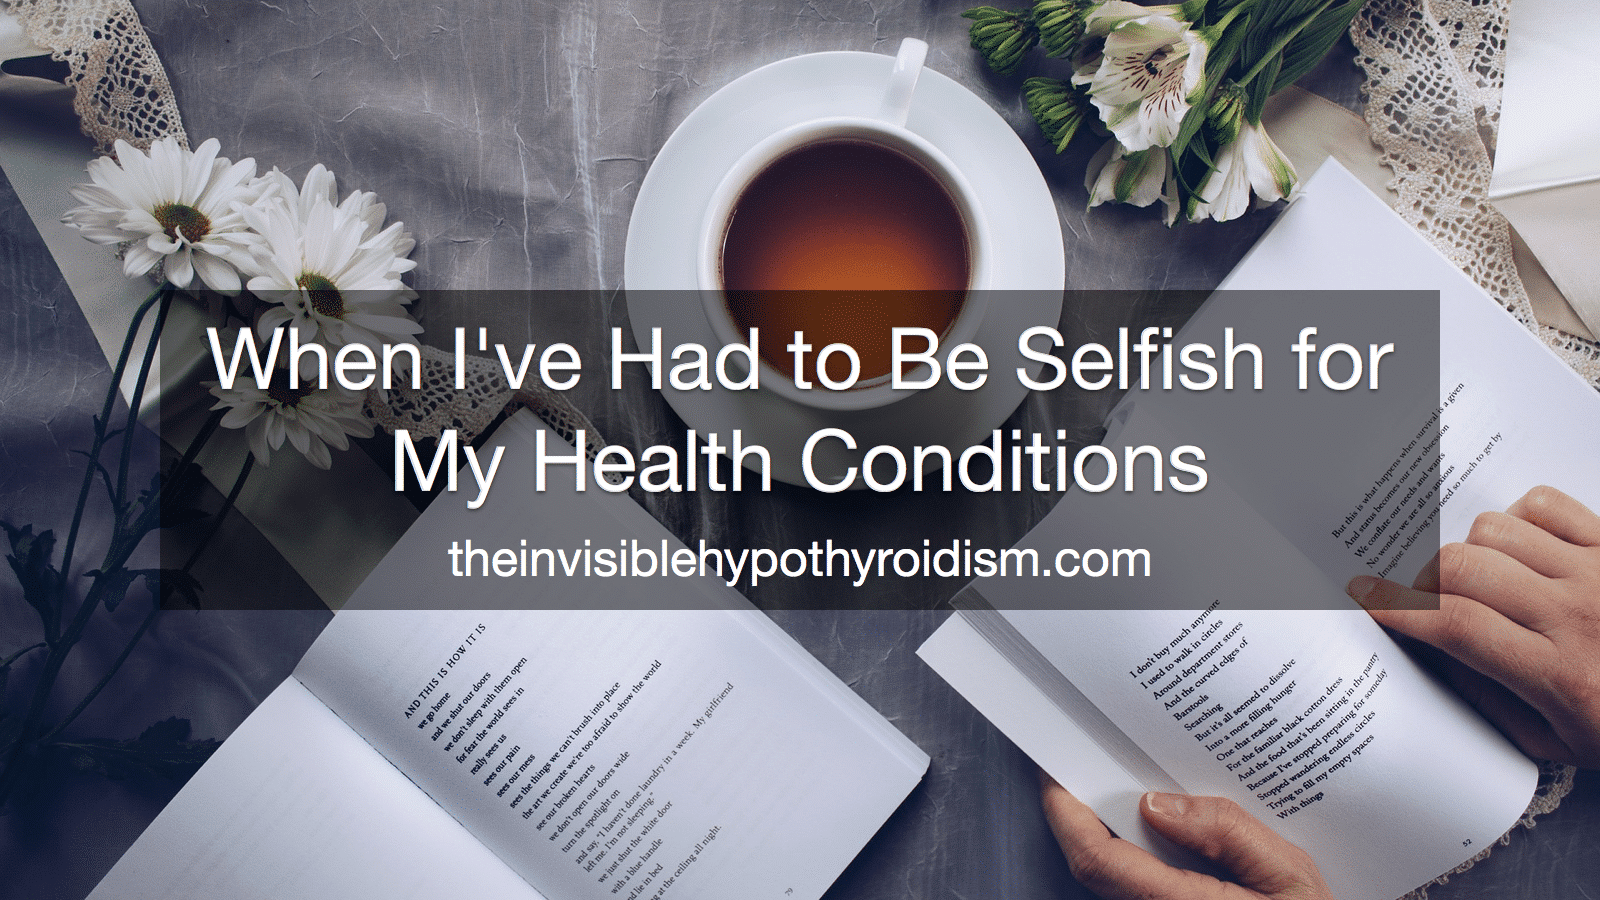 When I've Had to Be Selfish for My Health Conditions